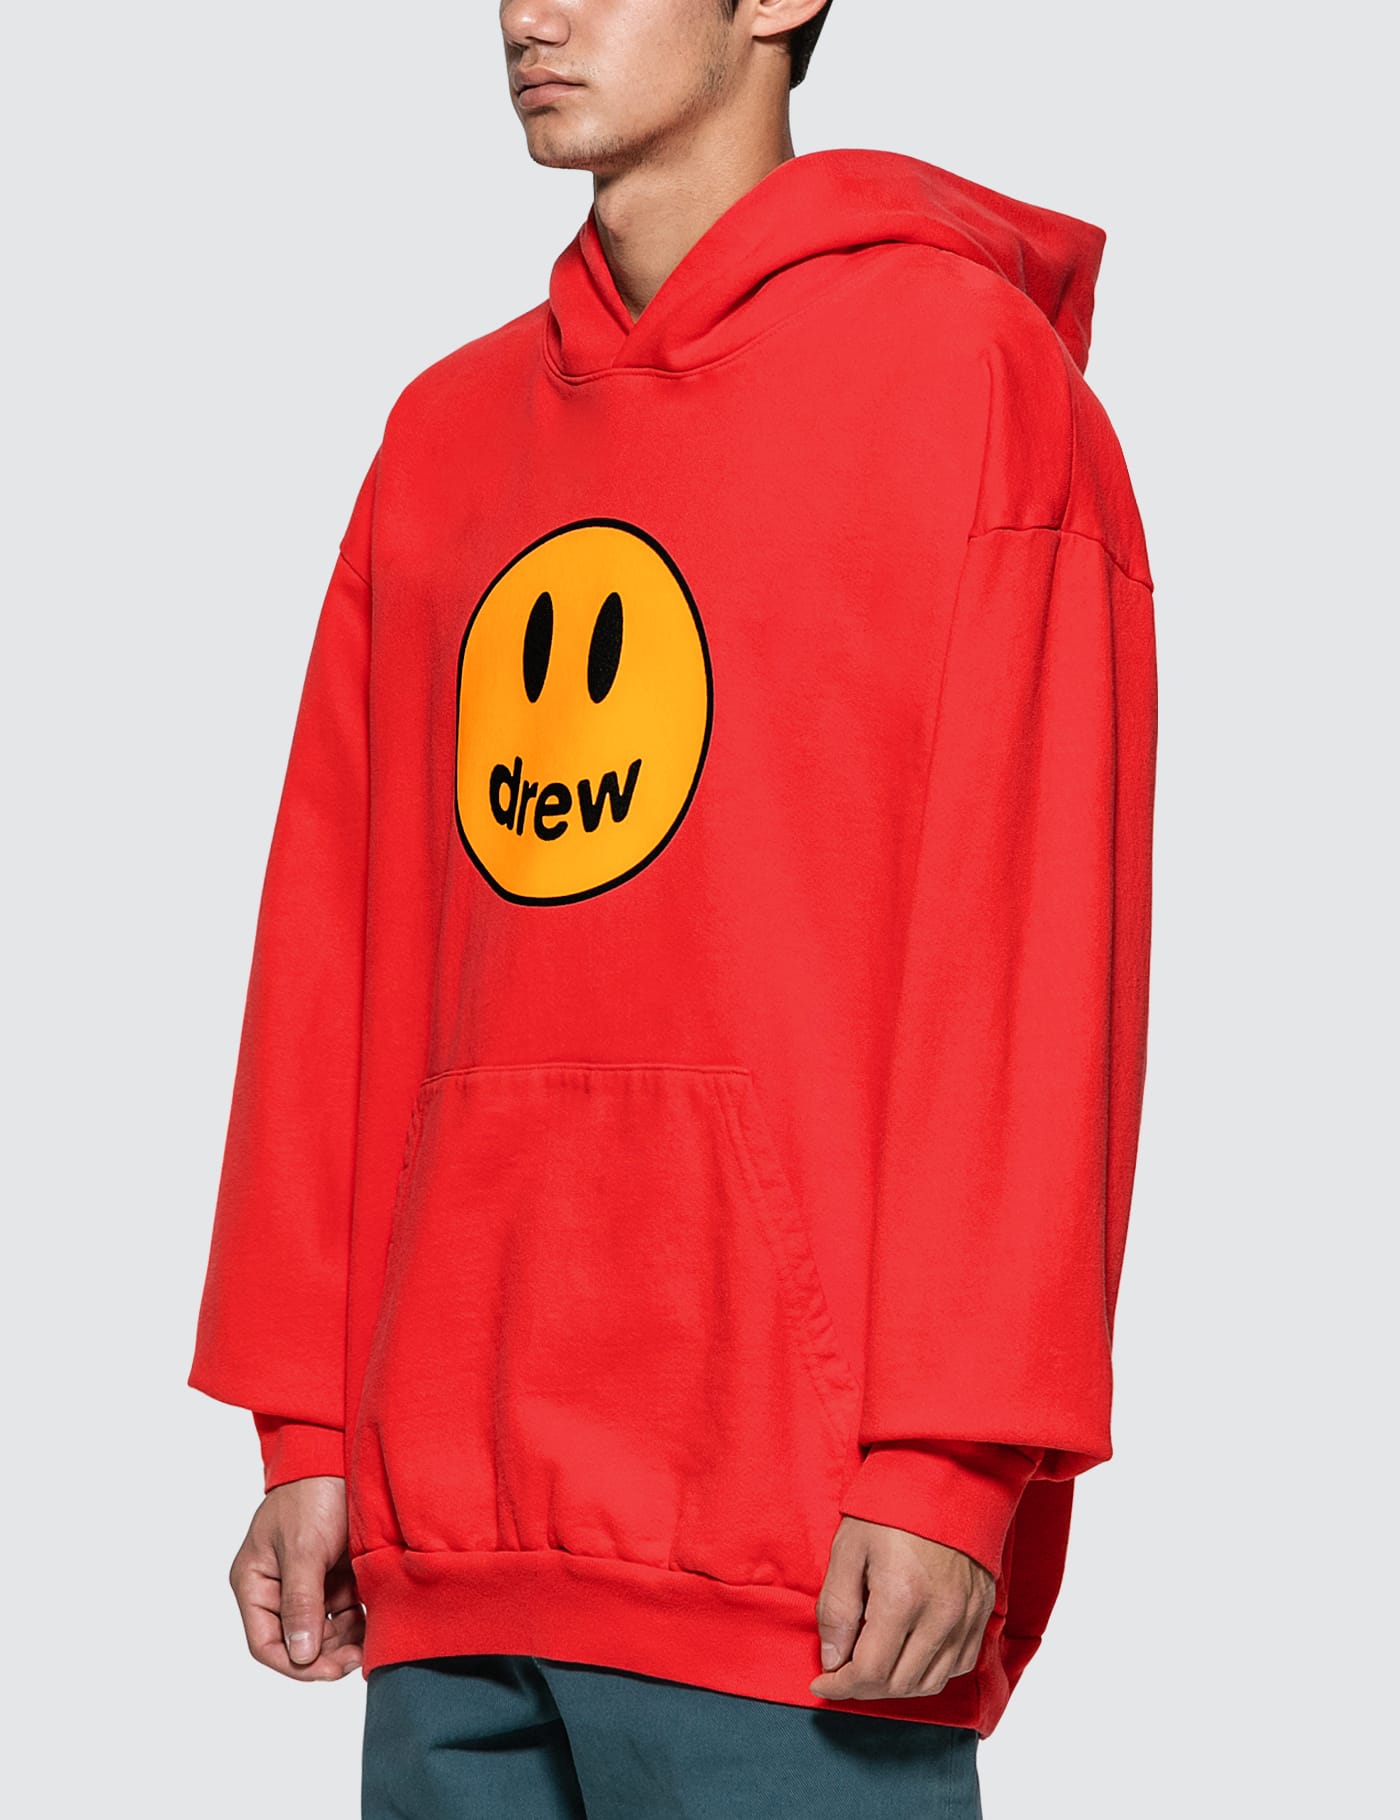 Drew House - Mascot Hoodie | HBX - Globally Curated Fashion and